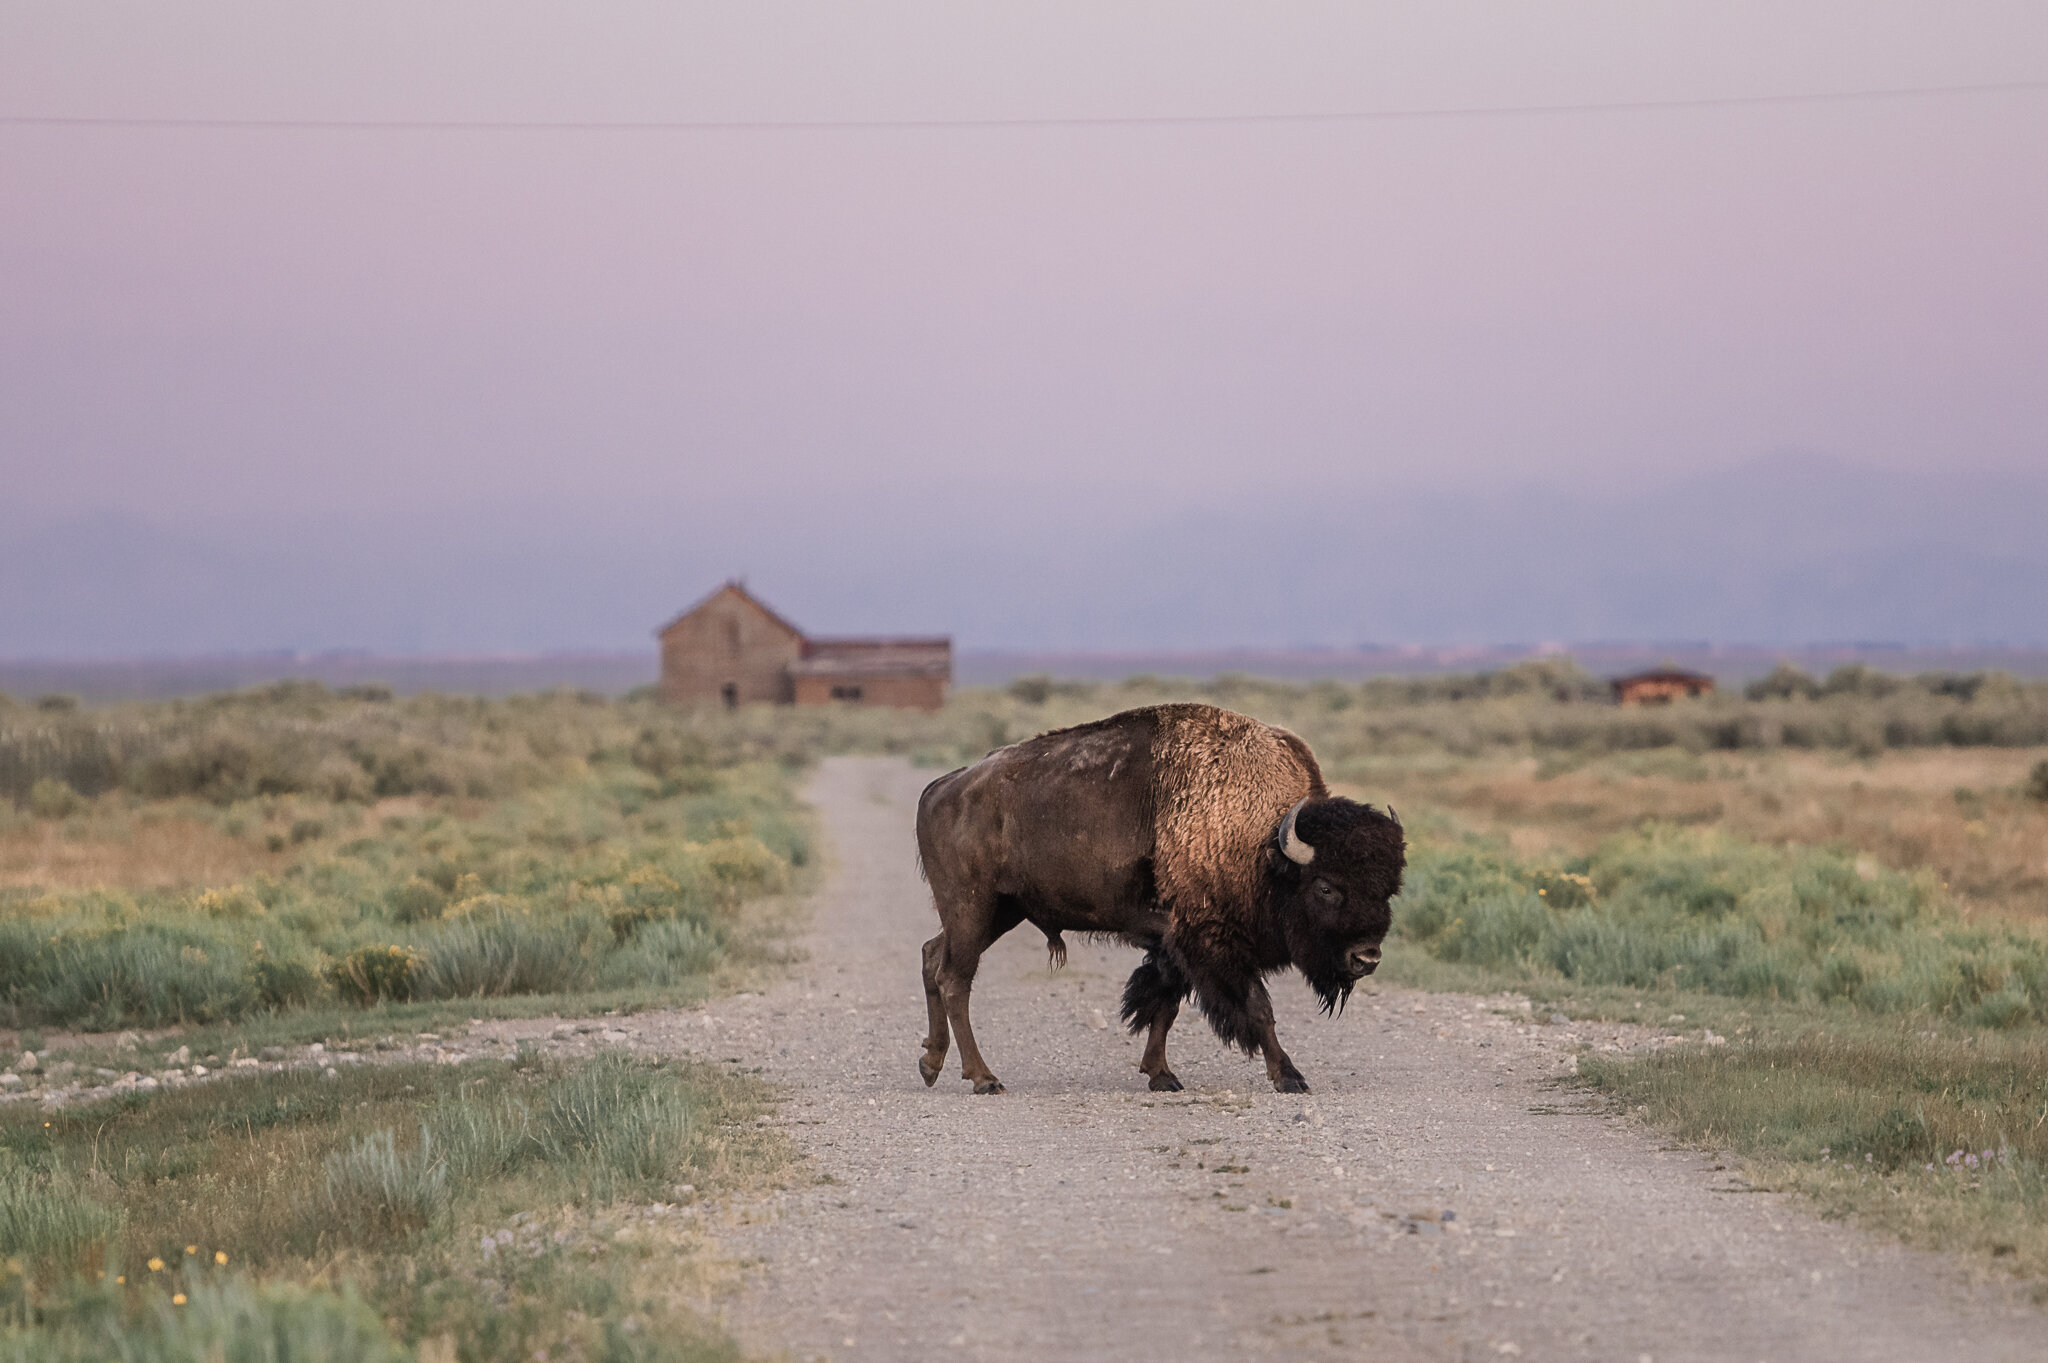   Incredible shot of a bison in front of the lodge (photo credit: Ranchlands)  